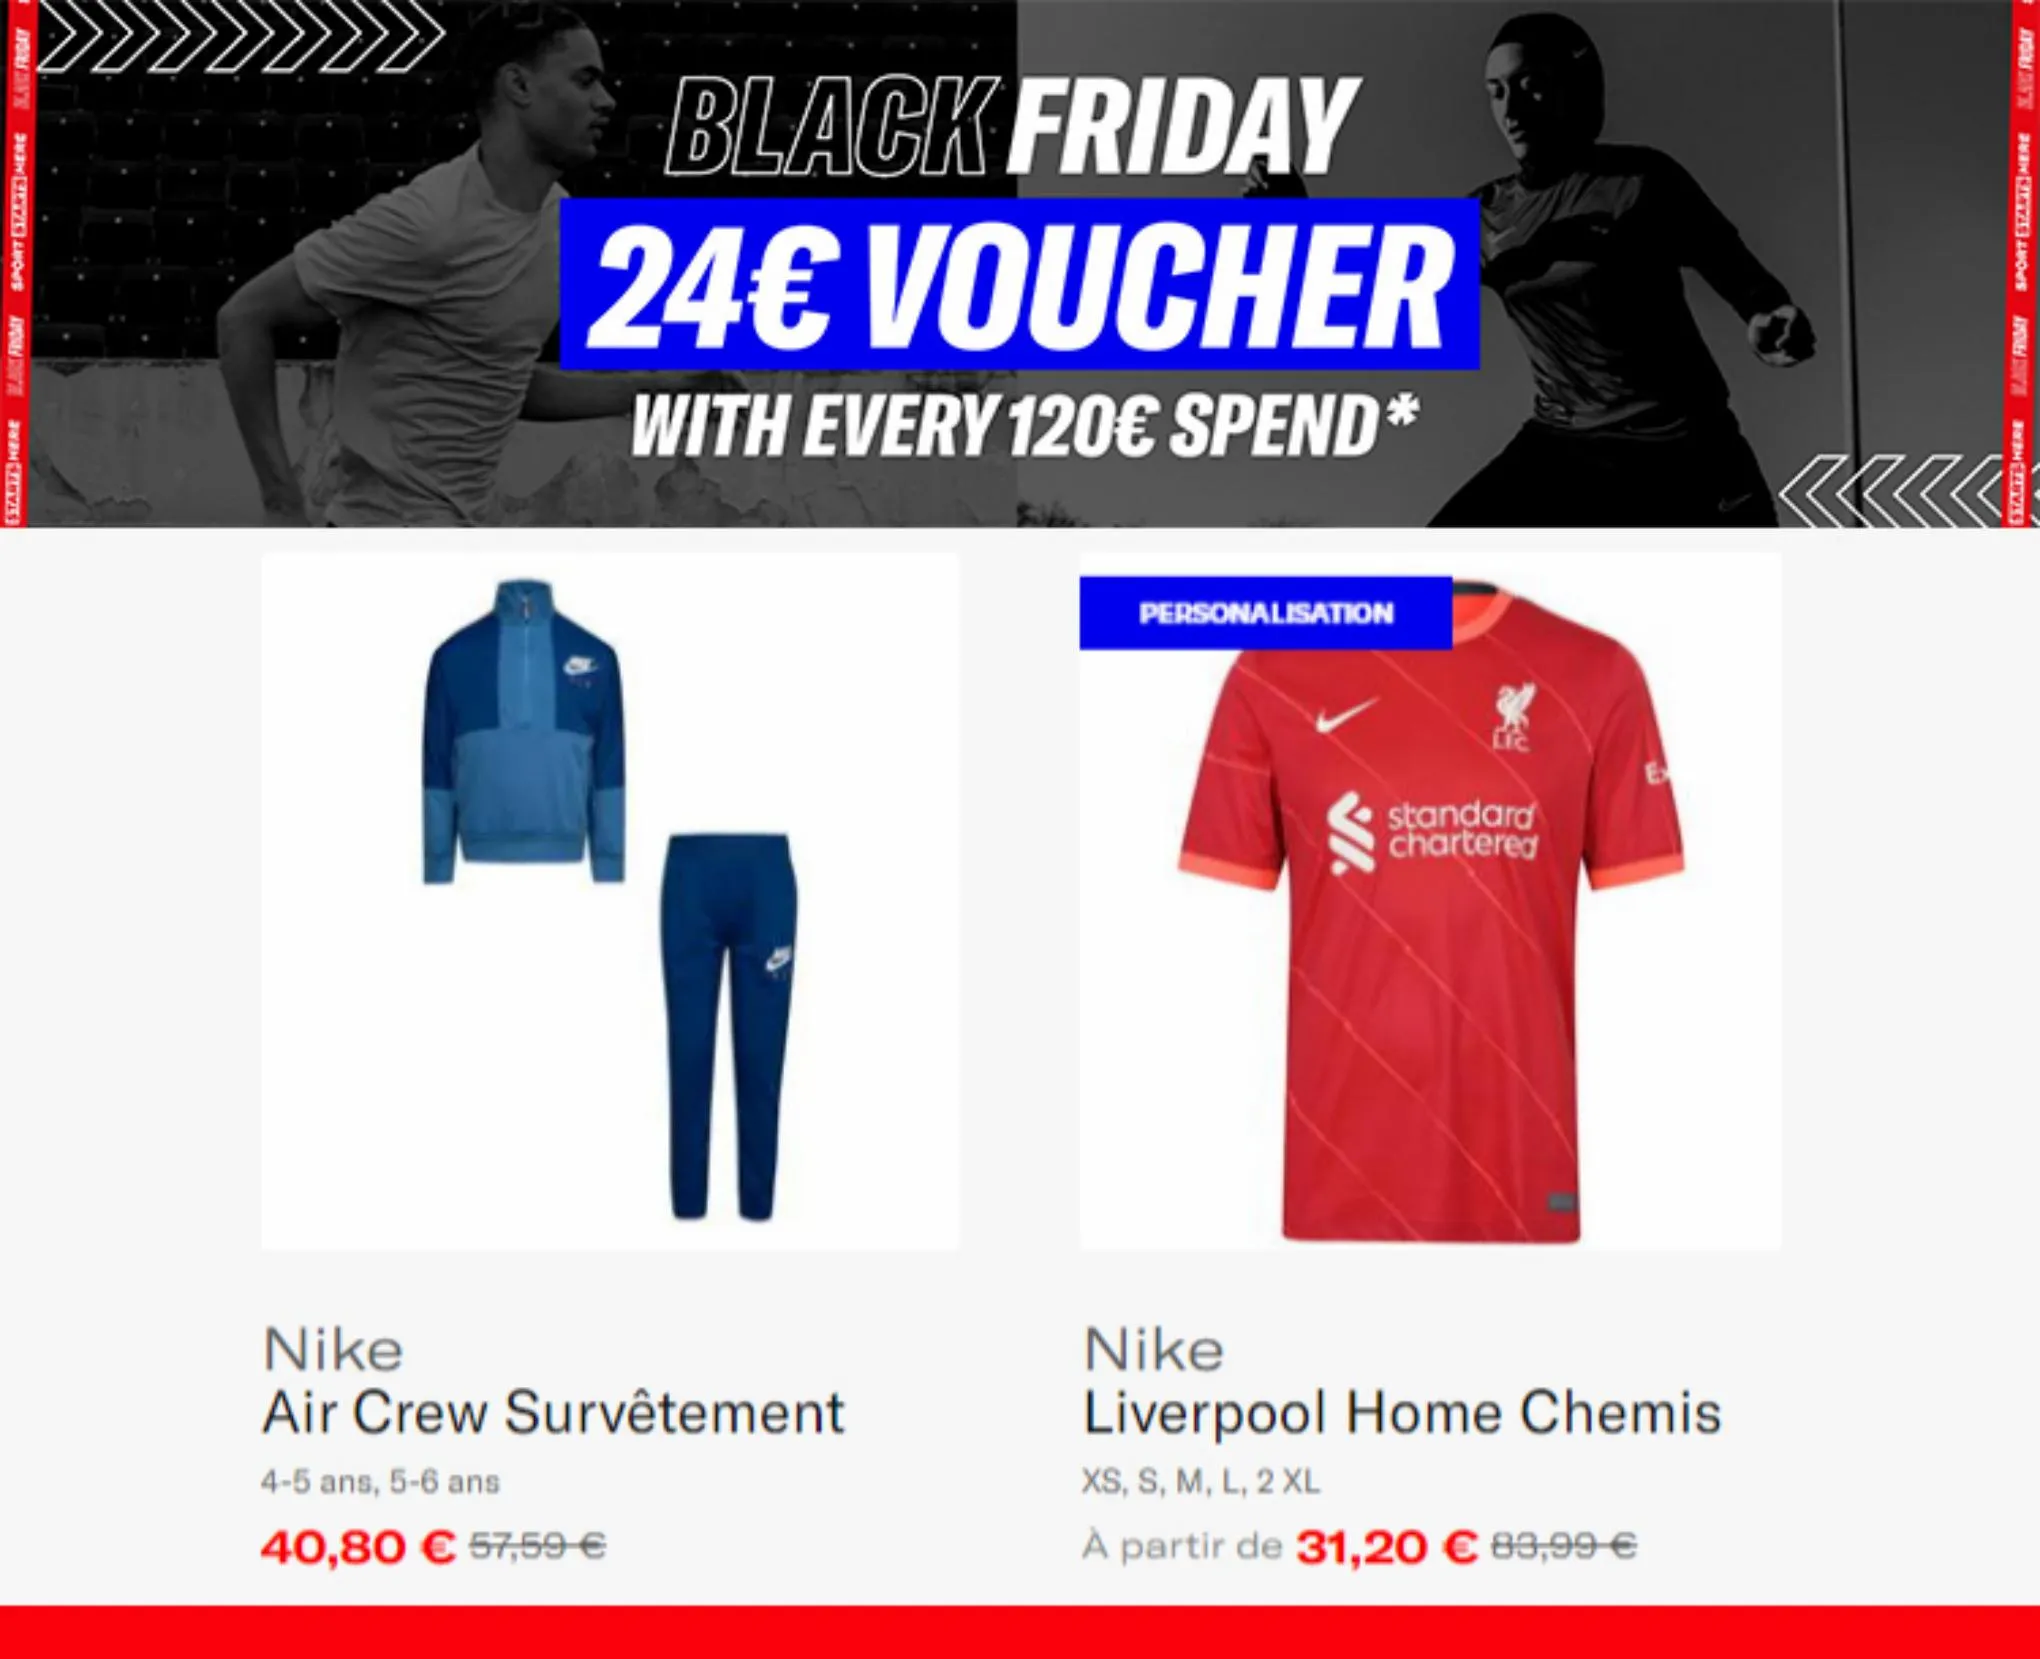 Catalogue Offres Sports direct Black Friday, page 00004